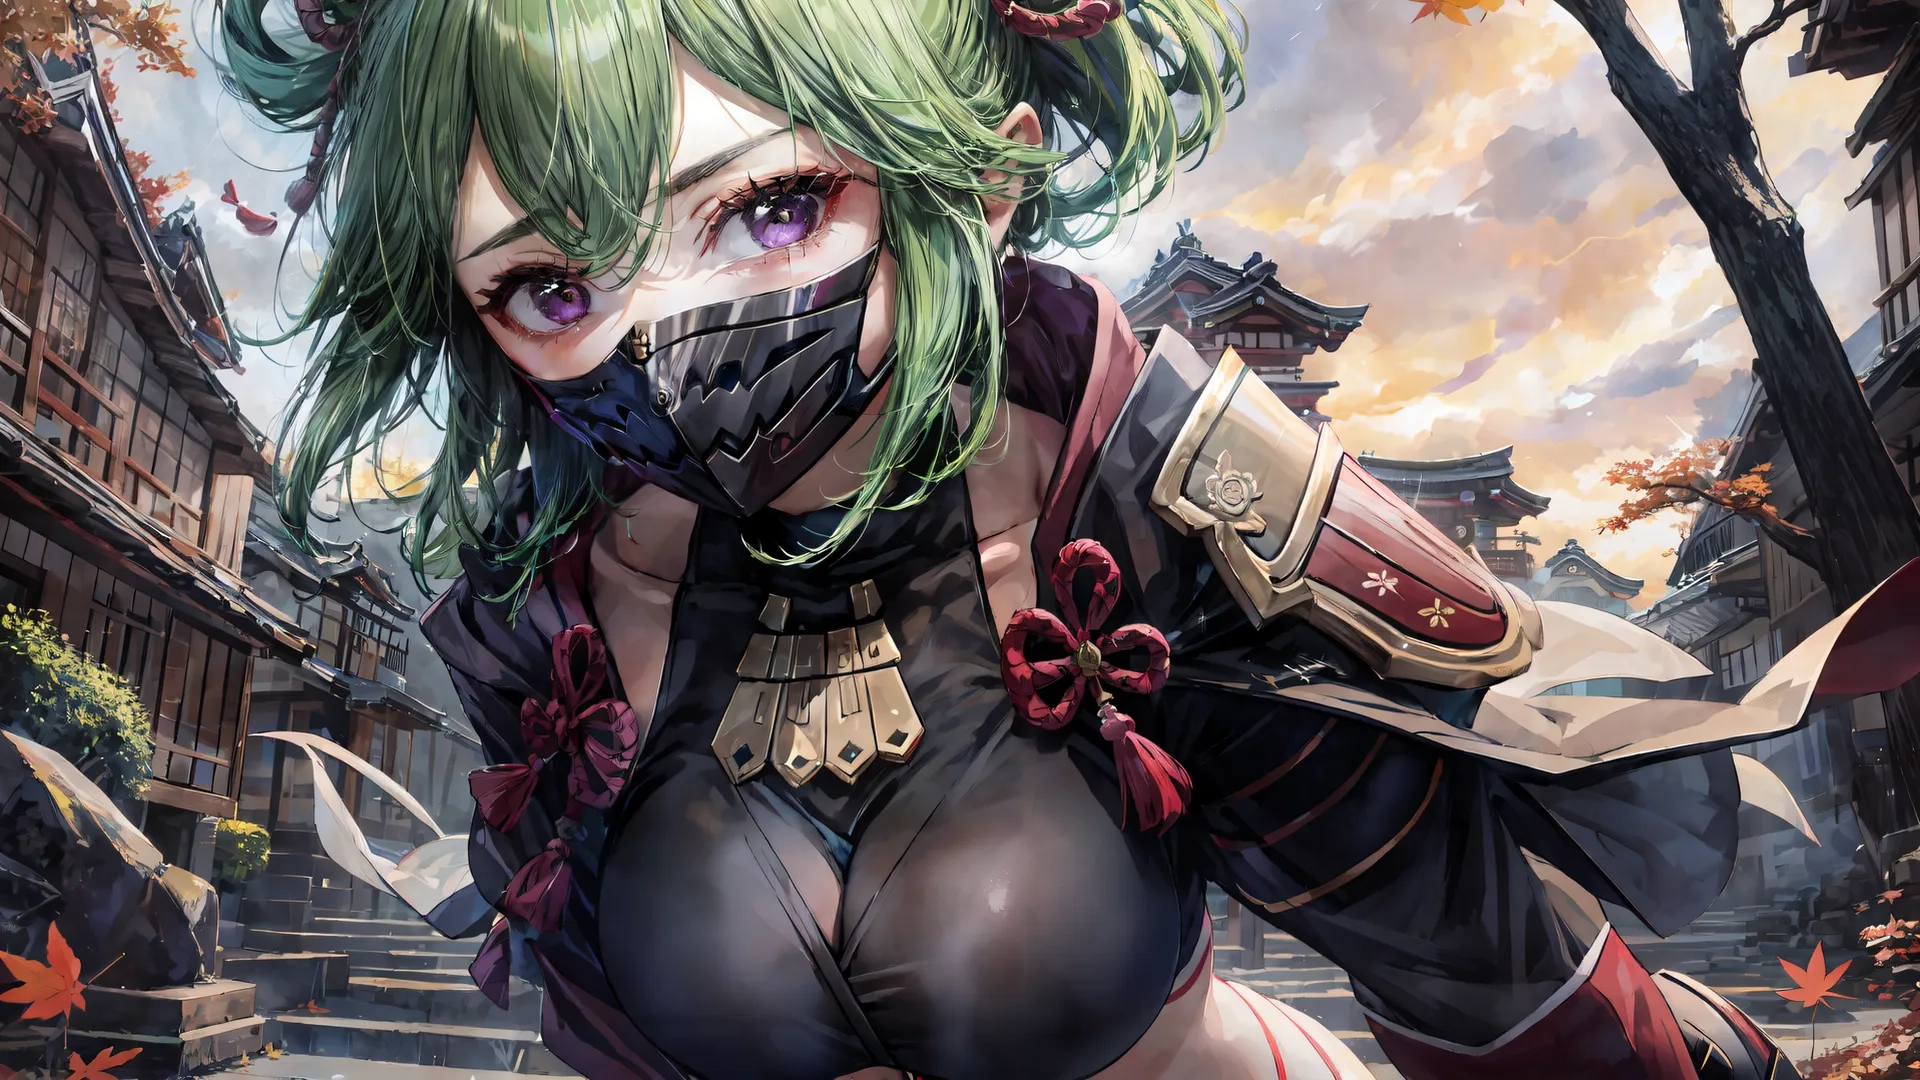 a very cute pretty woman with green hair in a costume for an anime game cover photo with buildings and fall trees in the background behind her
